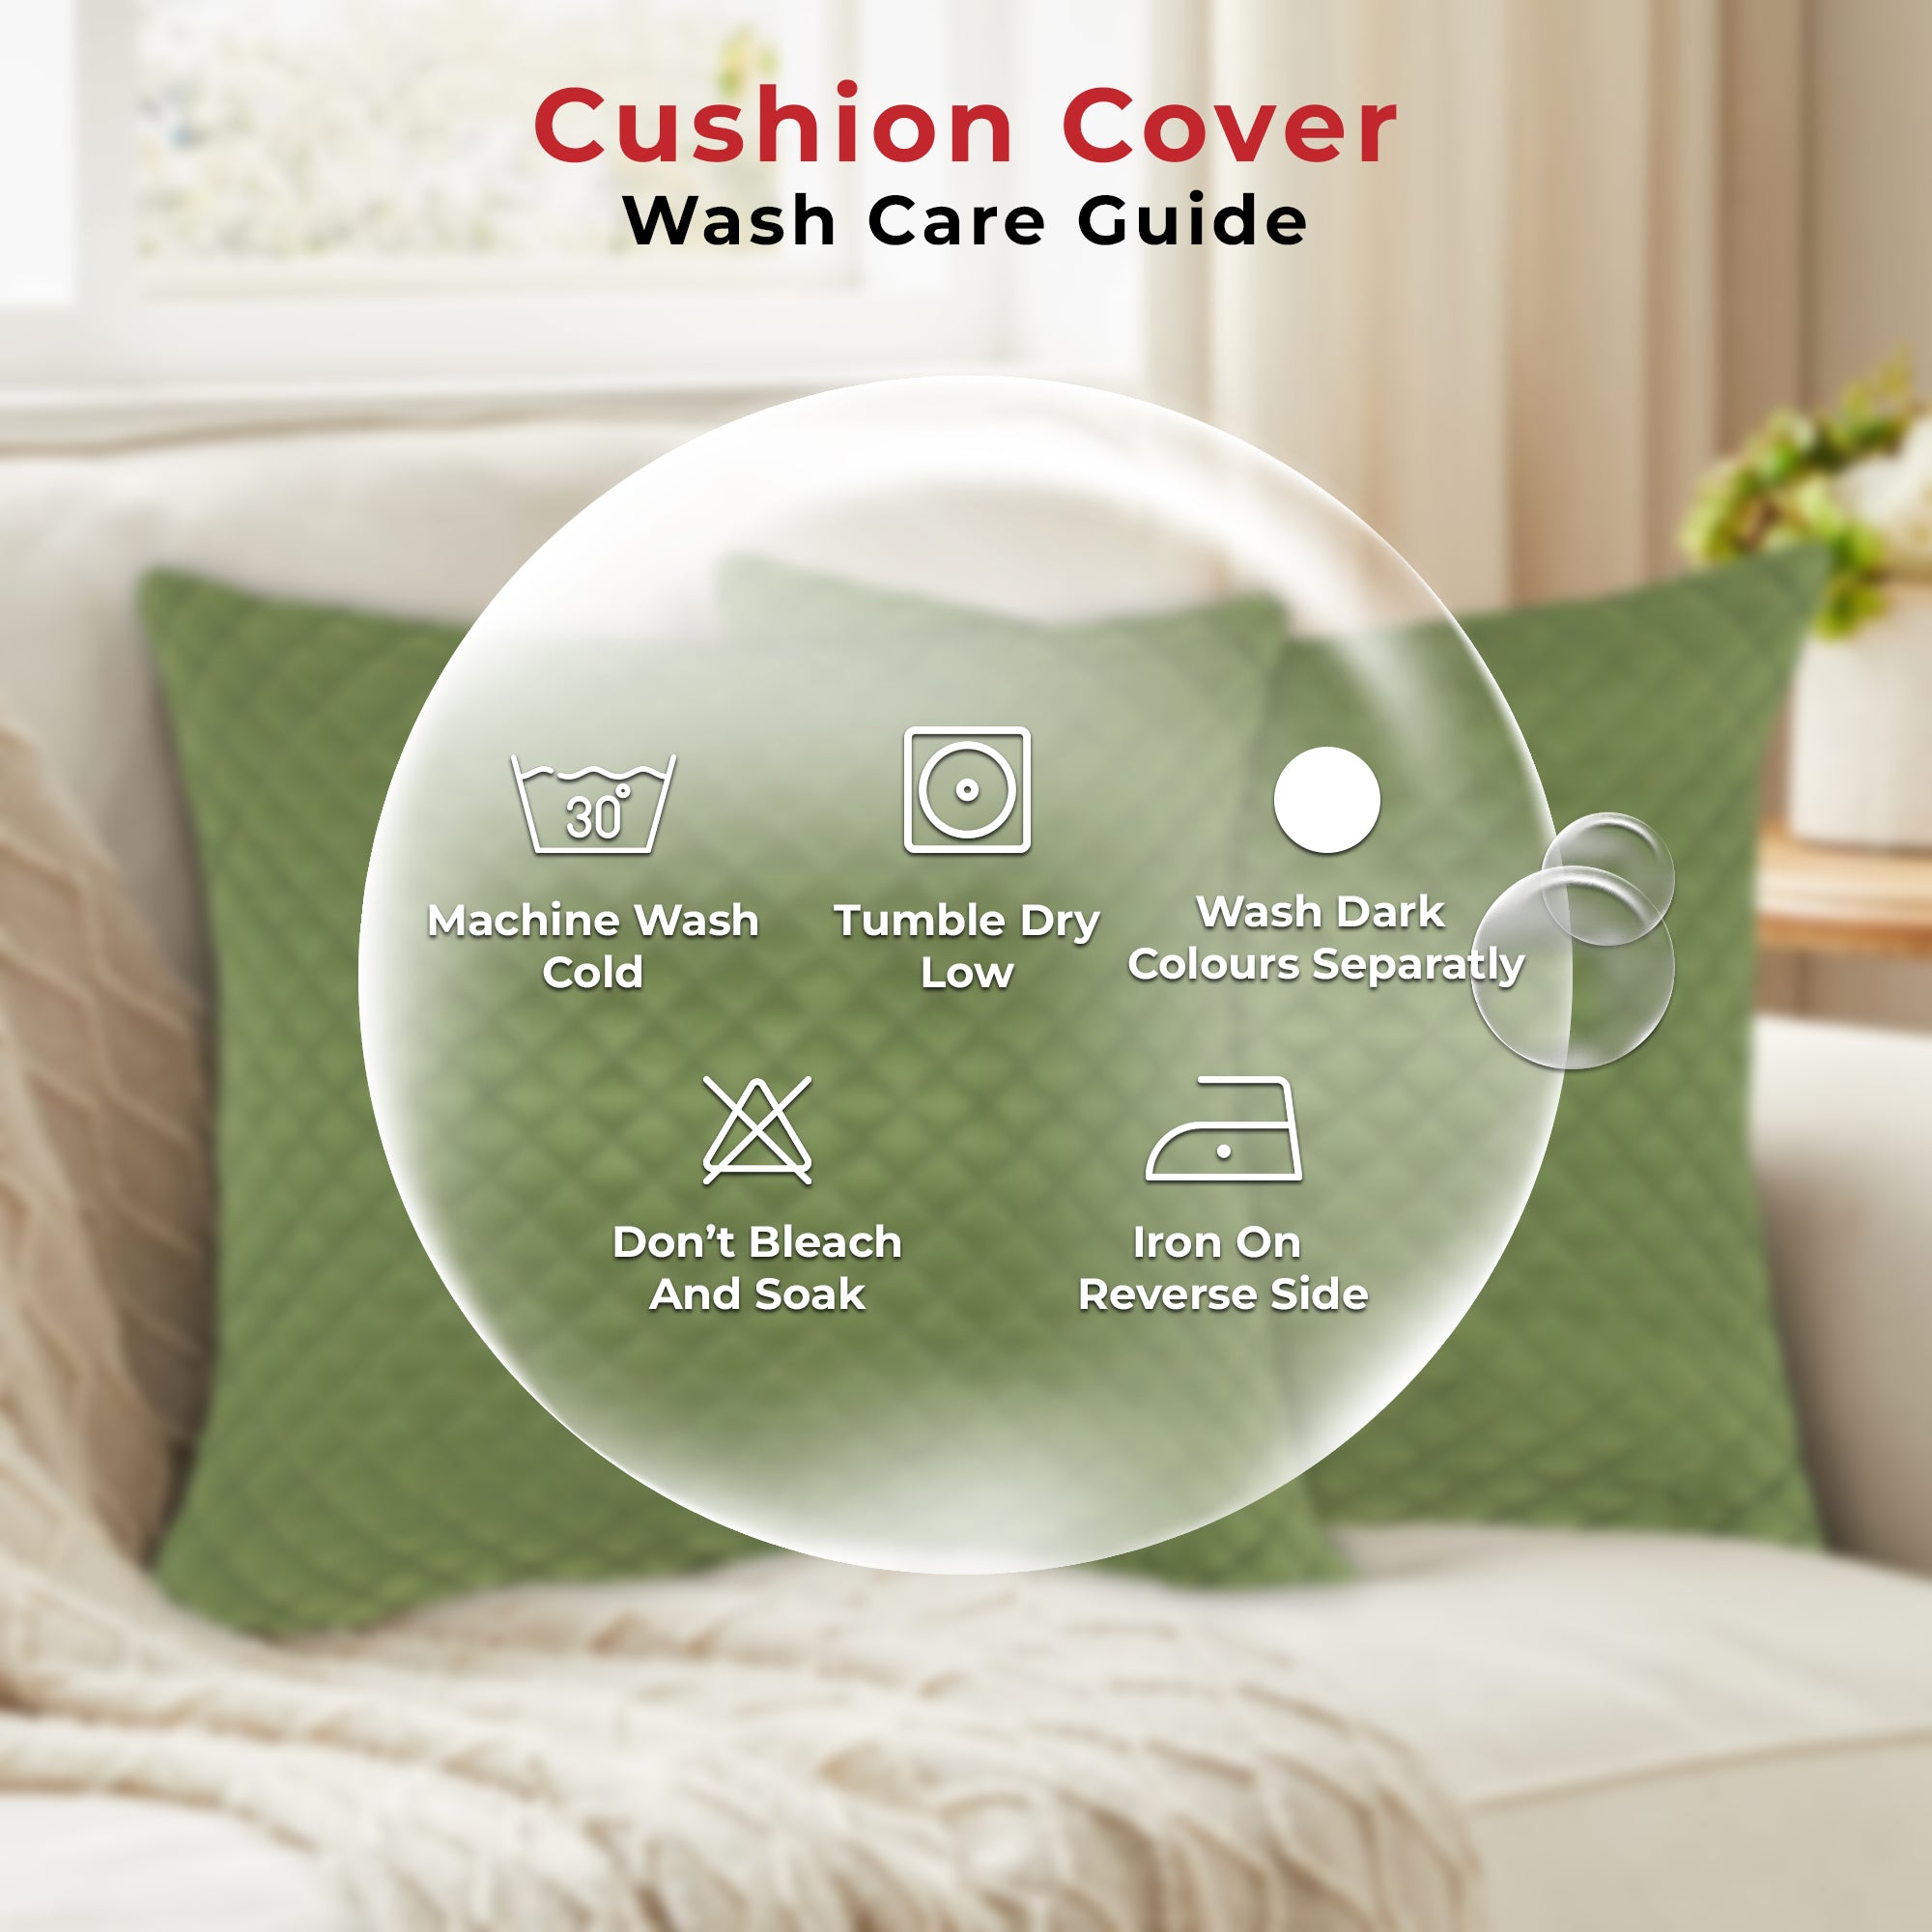 Tesmare Velvet Quilted Cushion Cover,Solid color Throw Pillow Case for Home Sofa, Pack of 2pcs,Green